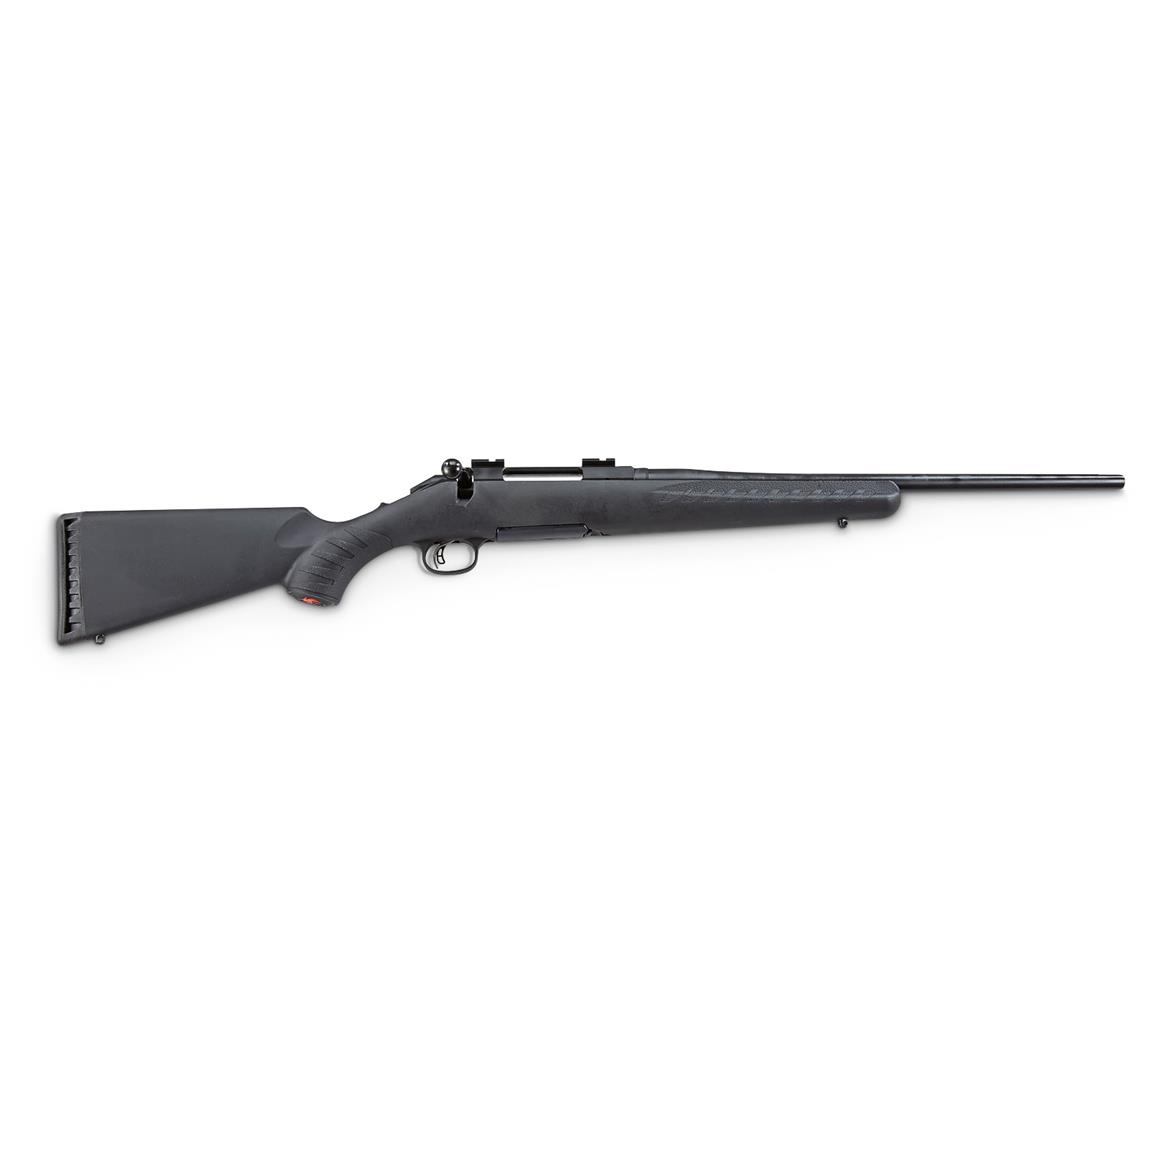 Ruger American Rifle Compact, Bolt Action, 7mm-08 Remington, Centerfire, 18" Barrel, 4 Rounds